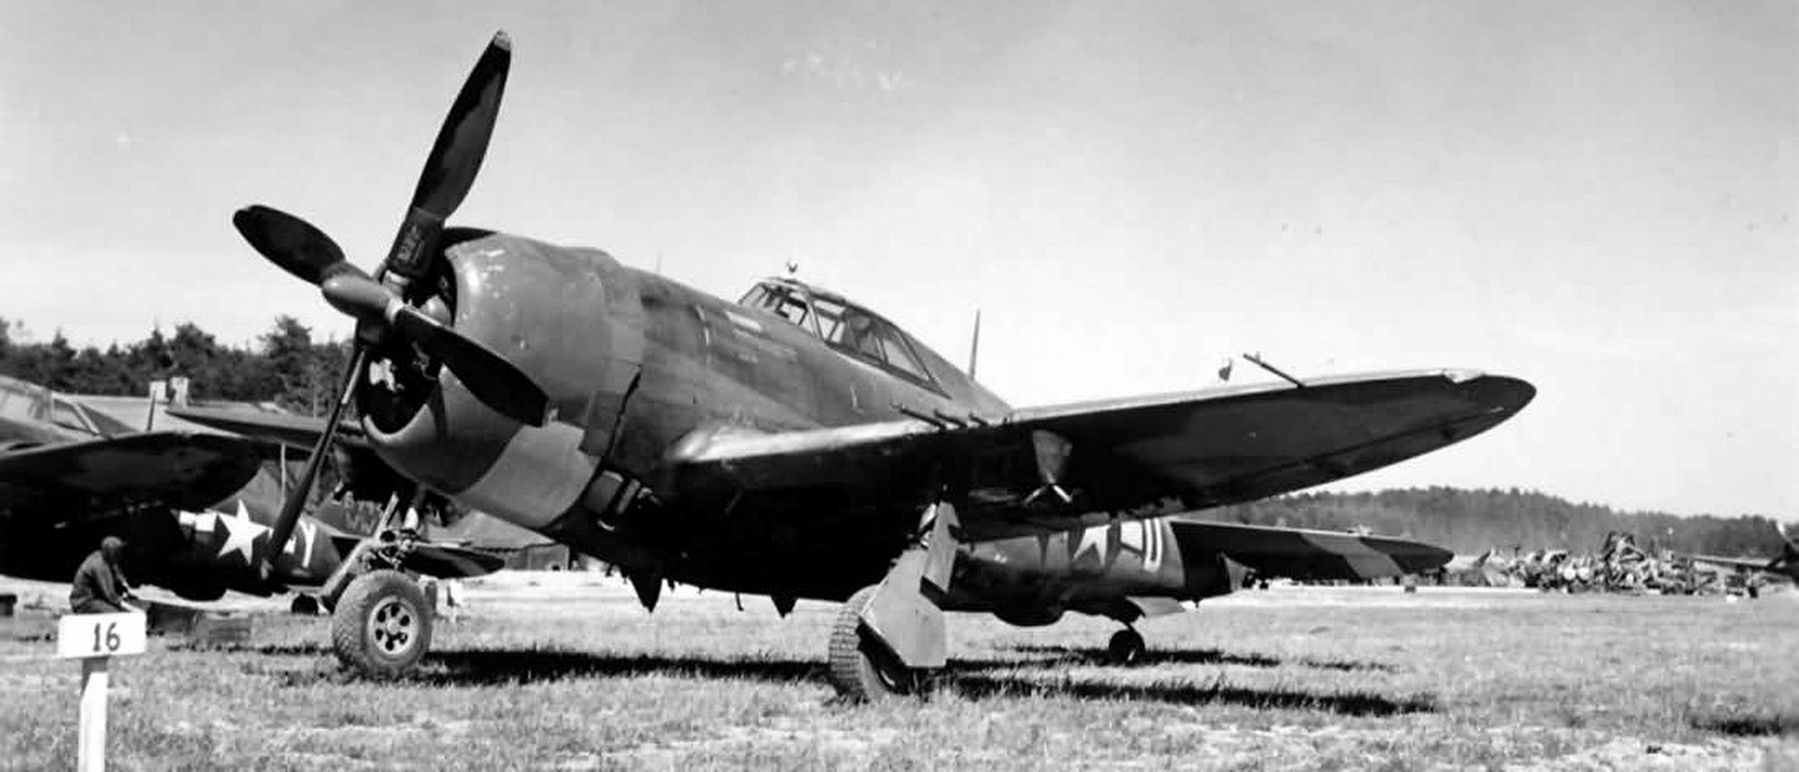 P-47 Thunderbolt of the 368th Fighter Group image. Click for full size.